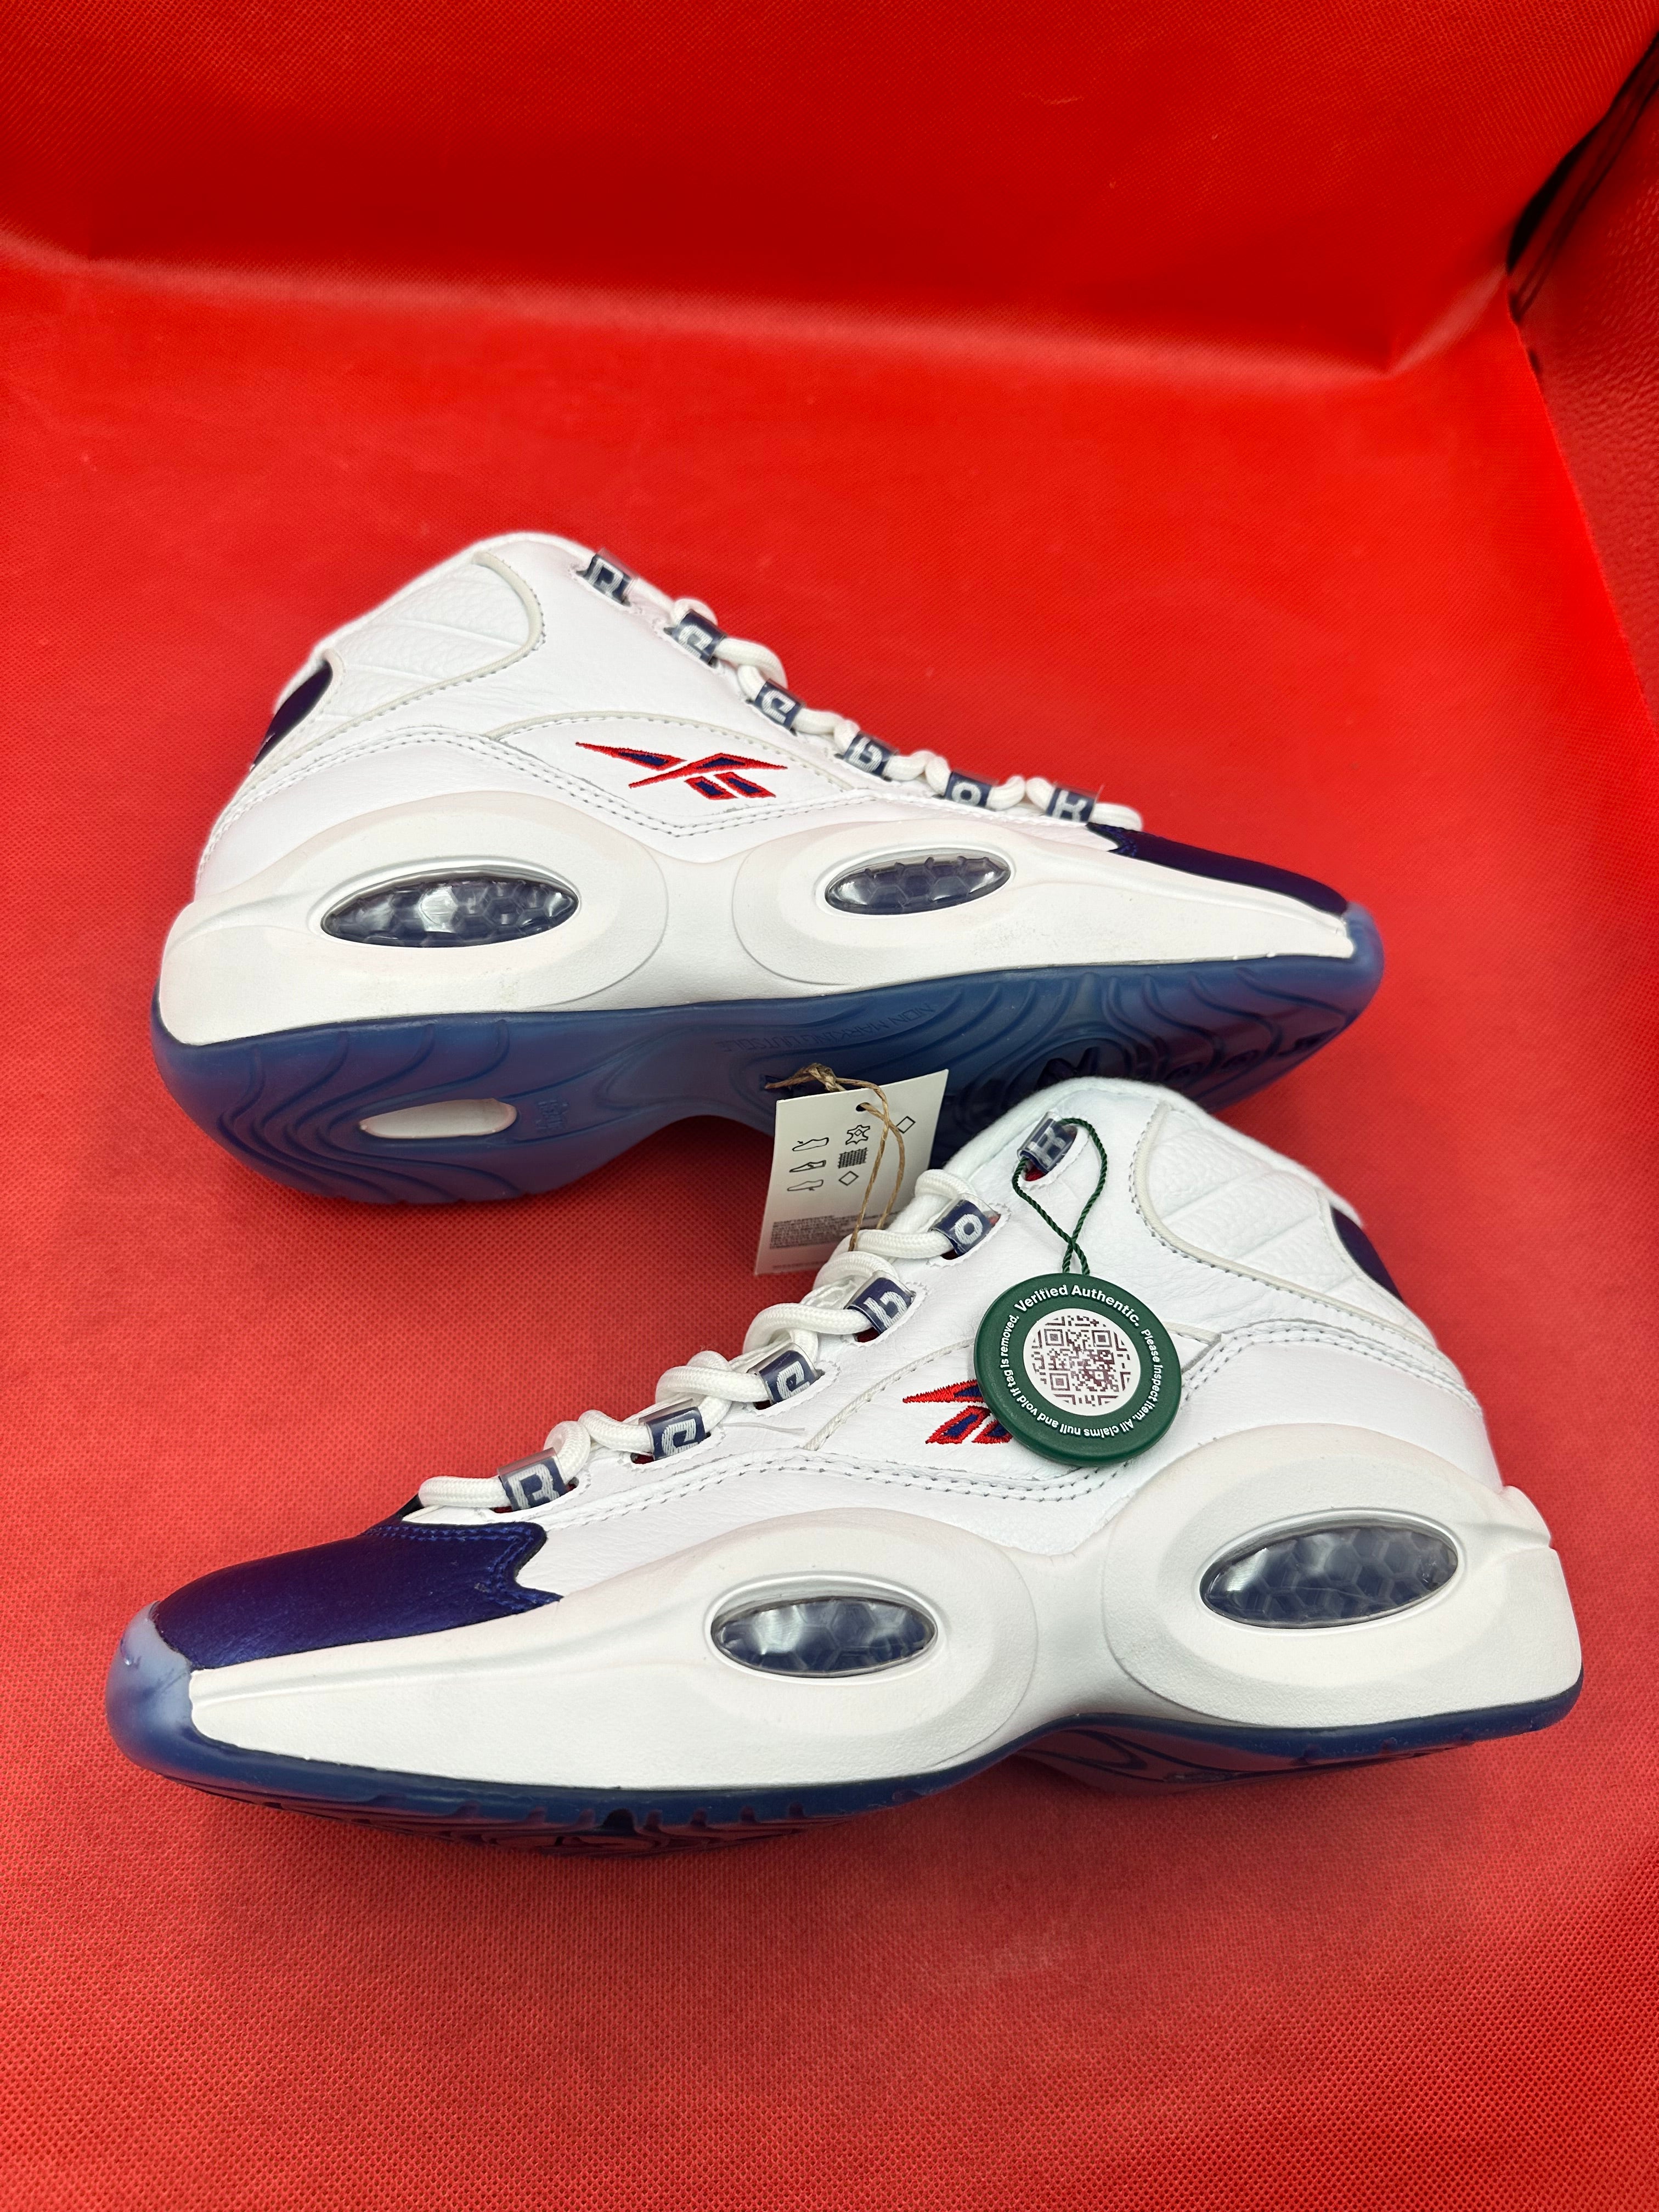 Brand new Blue Toe Reebox Question Size 8